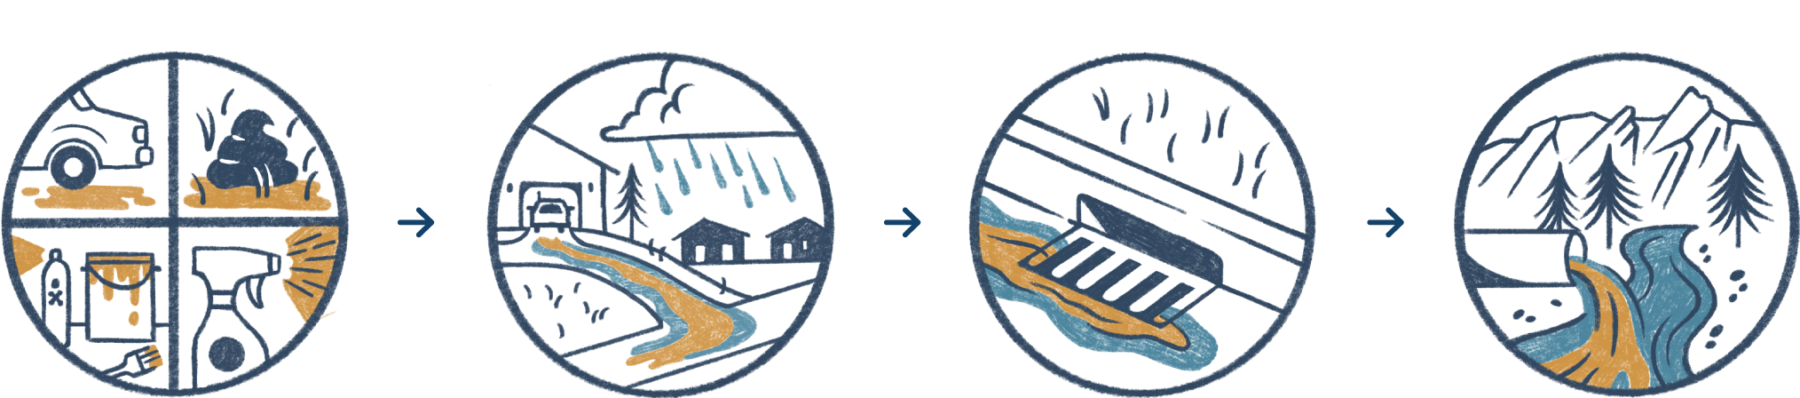 Infographic with 4 steps showing how stormwater pollutants travel from our homes into local waterways through the stormwater system.